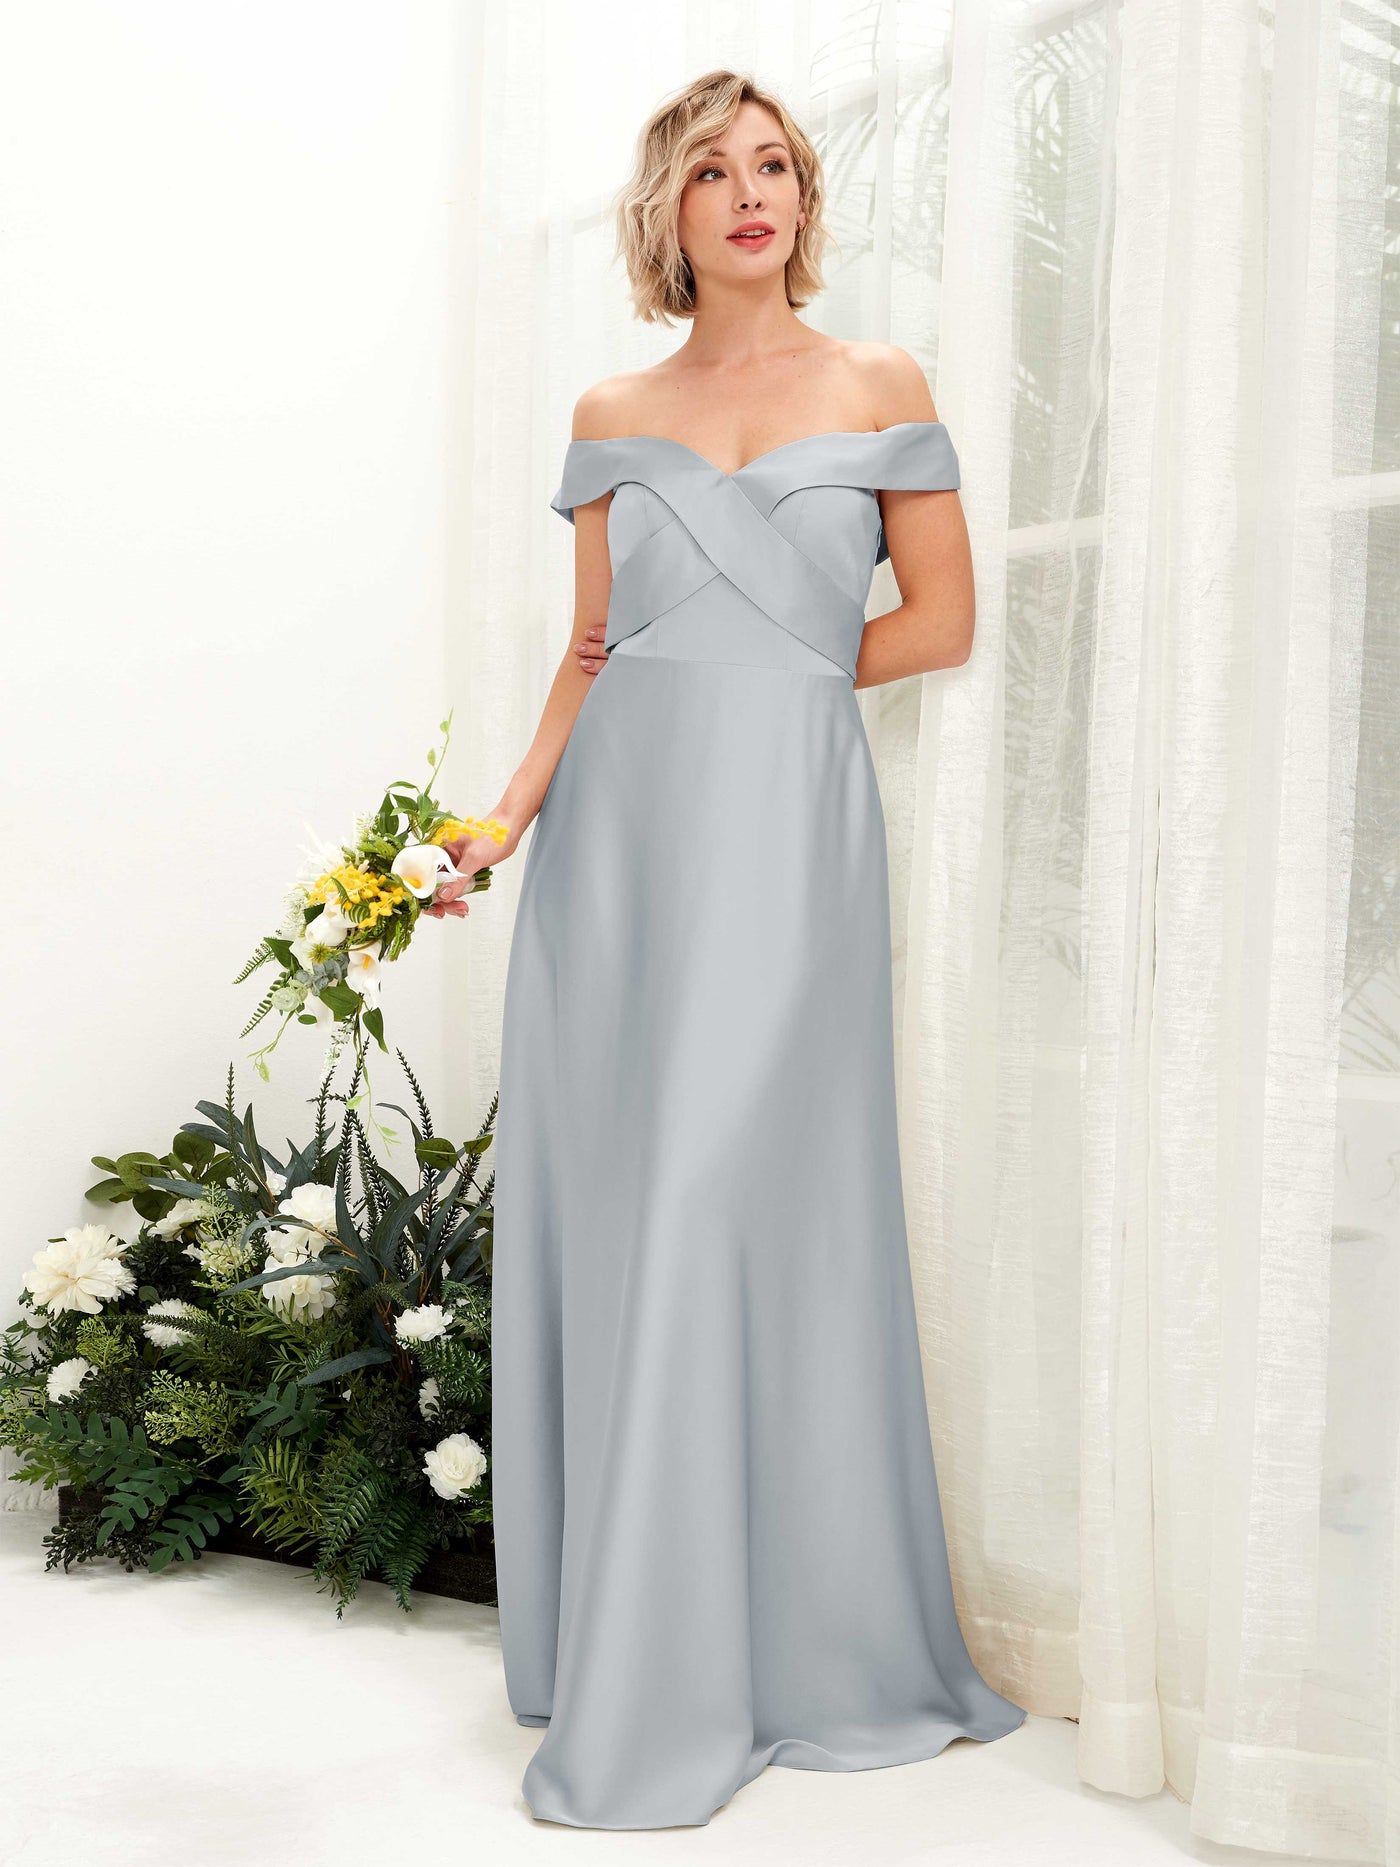 Baby Blue Bridesmaid Dresses Bridesmaid Dress A-line Satin Off Shoulder Full Length Short Sleeves Wedding Party Dress (80224201)#color_baby-blue